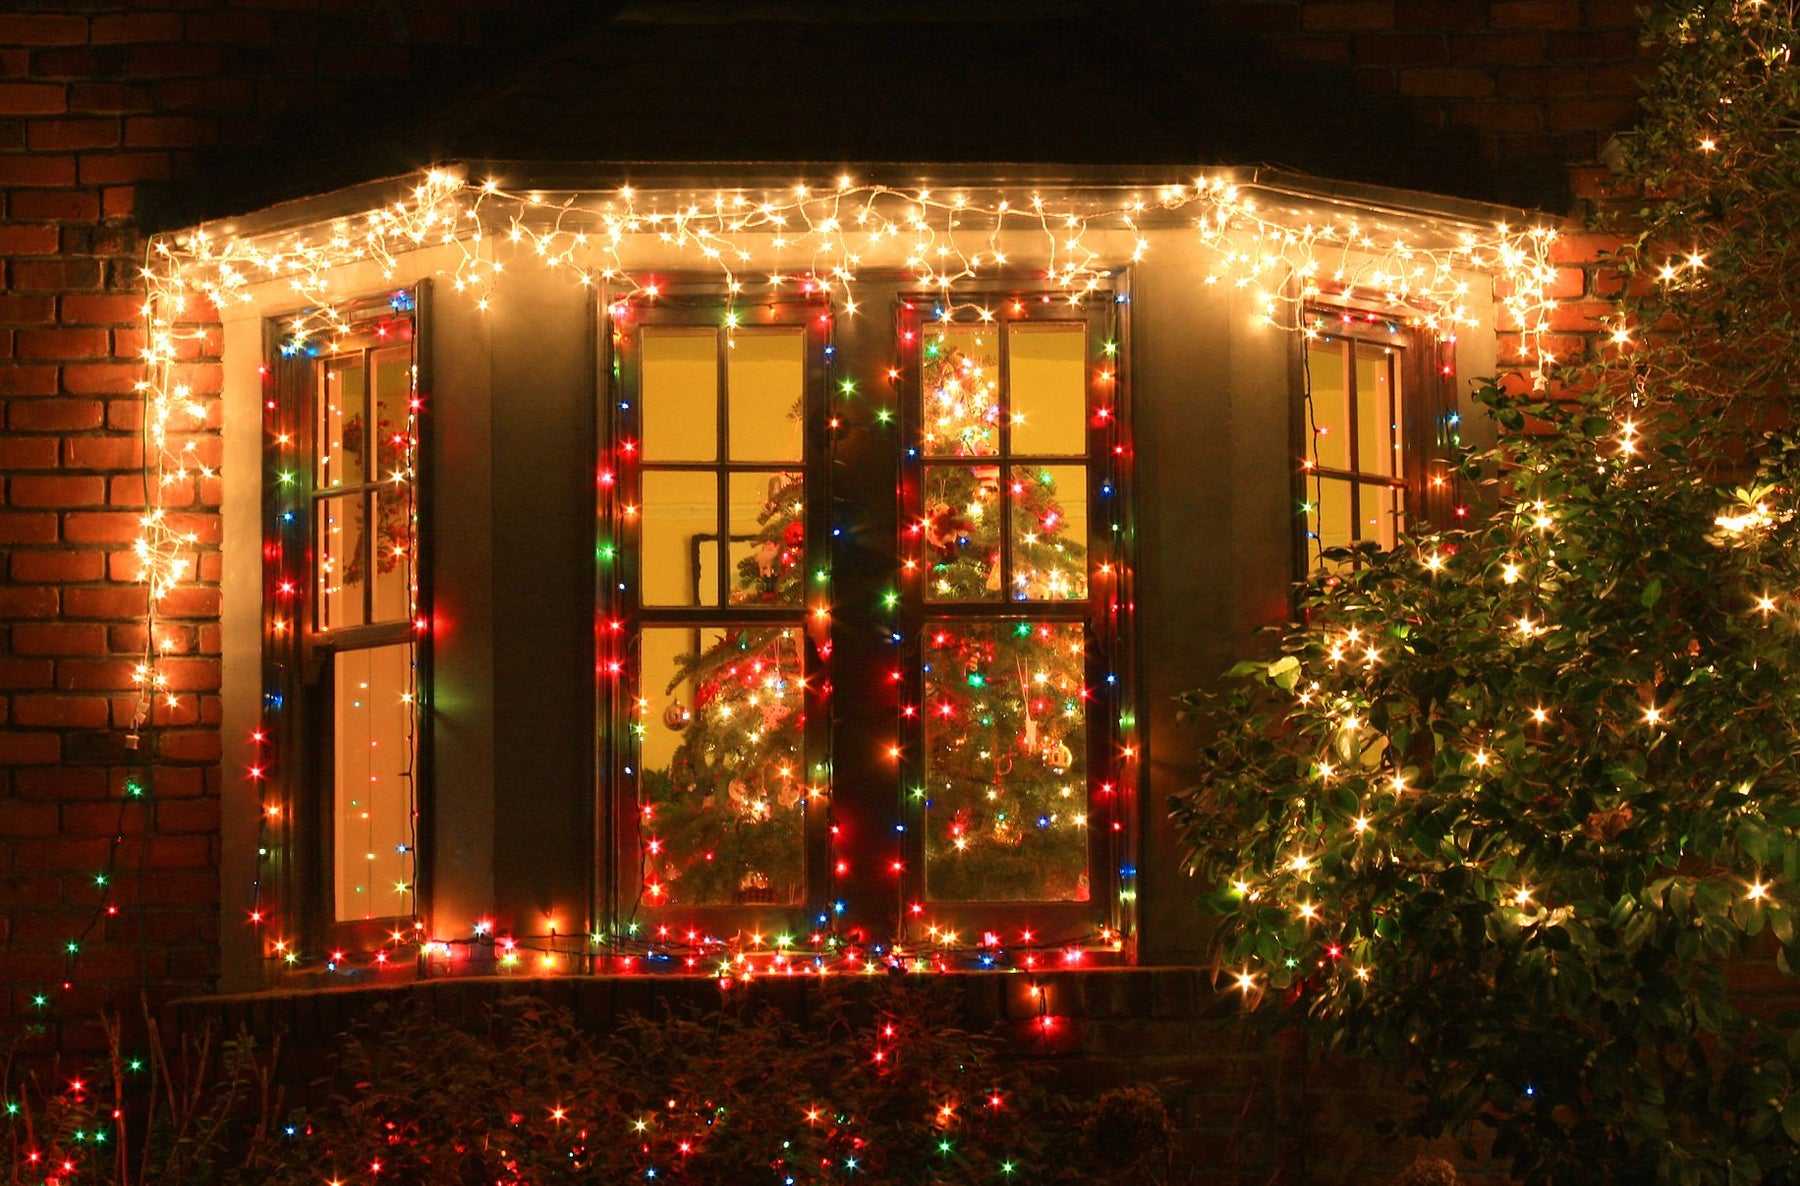 How to Hang Outdoor Christmas Lights Safely